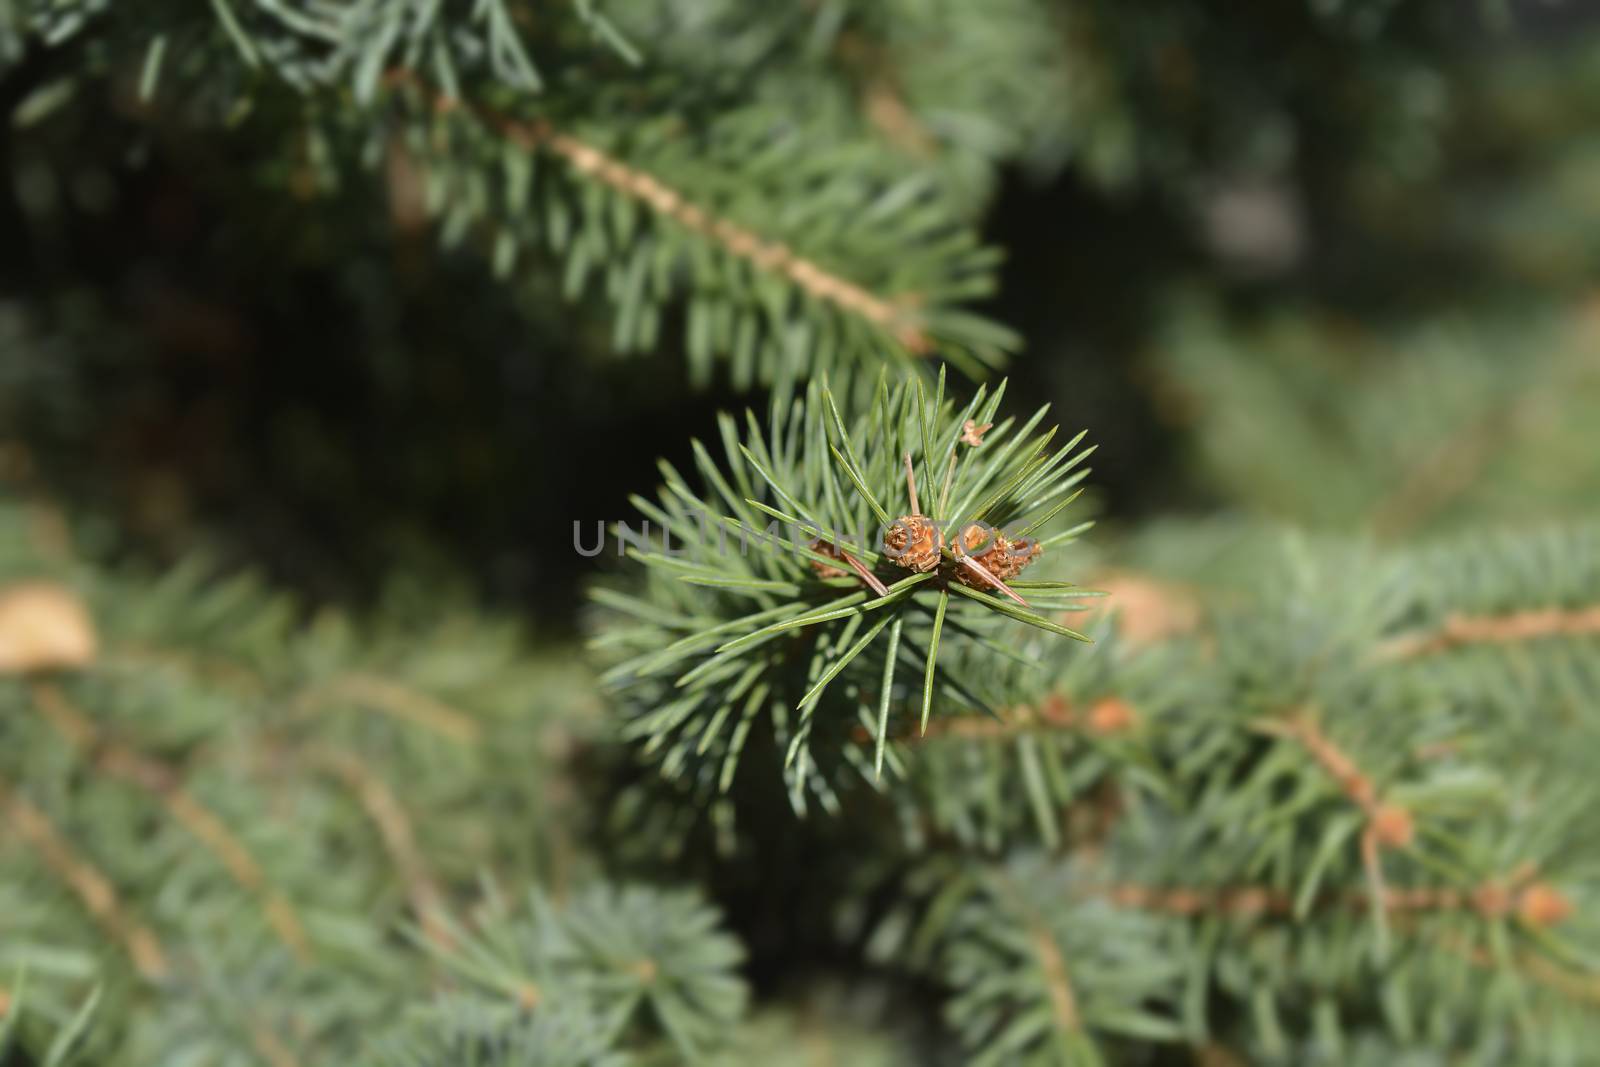 Norway spruce - Latin name - Picea abies